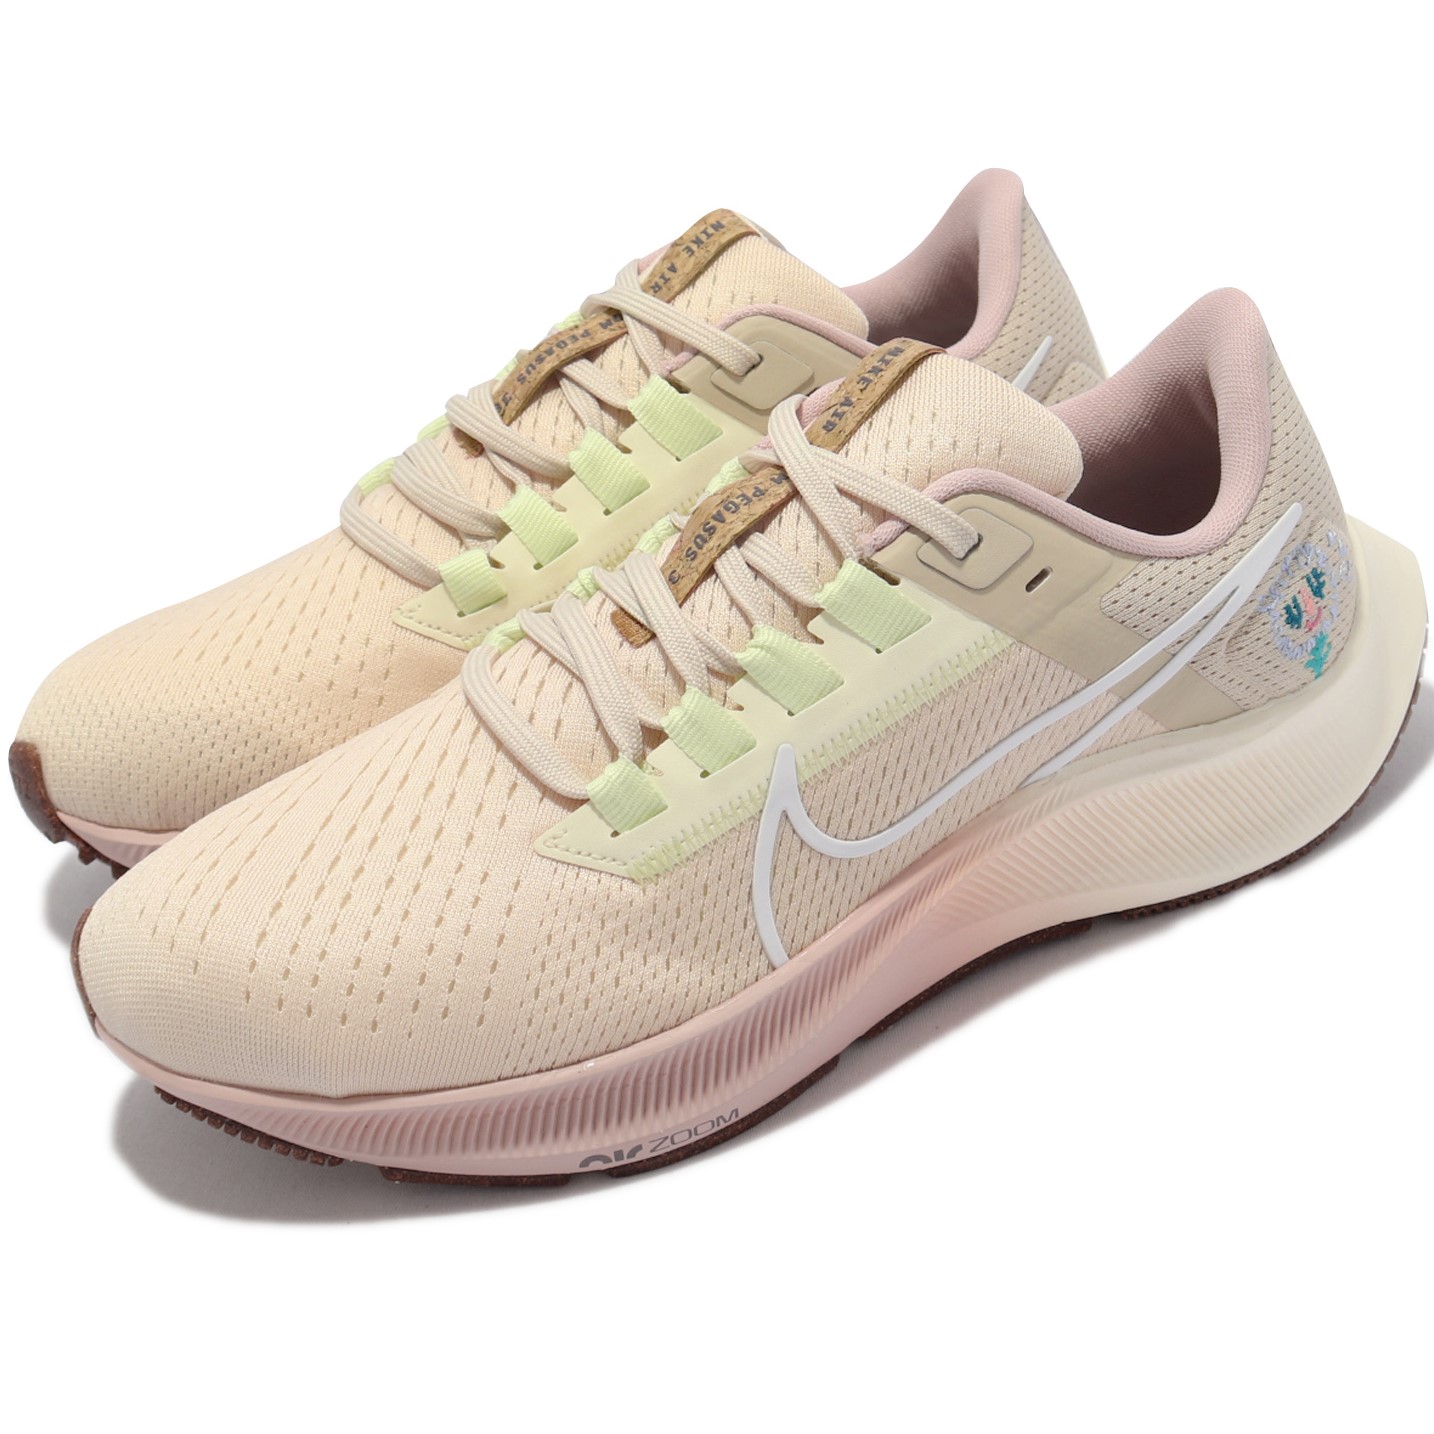 GIÀY THỂ THAO NIKE WMNS AIR ZOOM PEGASUS 38 WOMEN RUNNING SHOES BEIGE 3